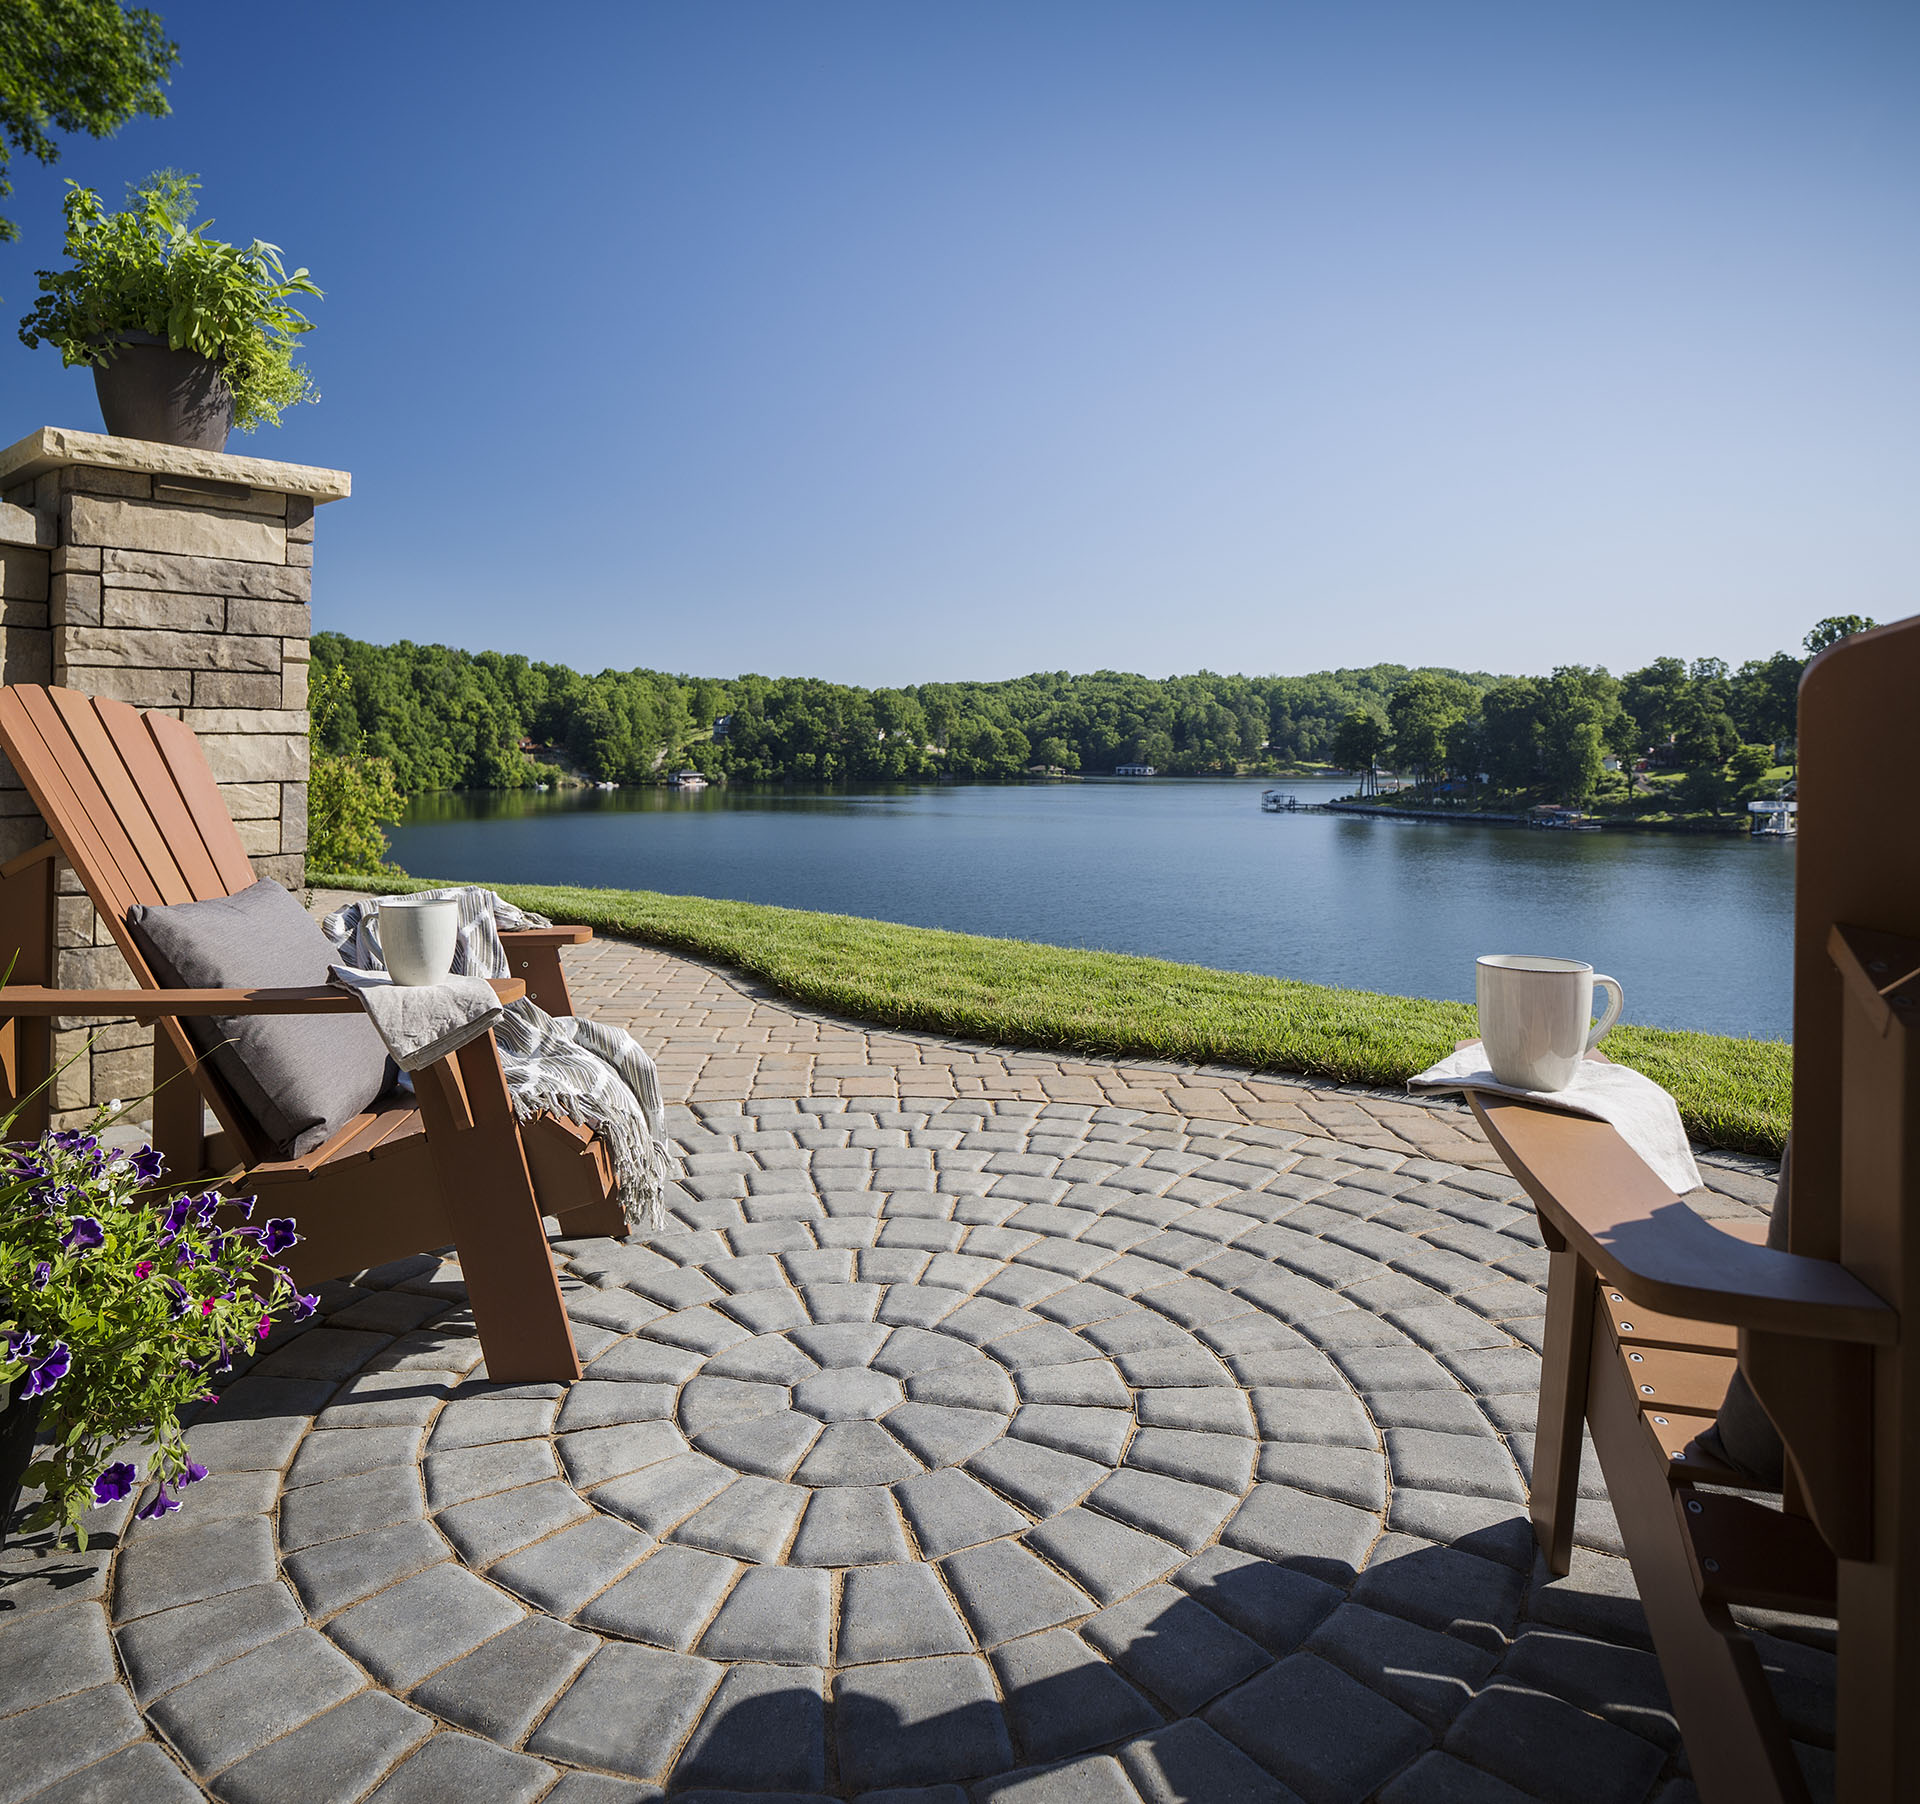 59 Beautiful Paver Patio Ideas for Your Home | INSTALL-IT-DIRECT